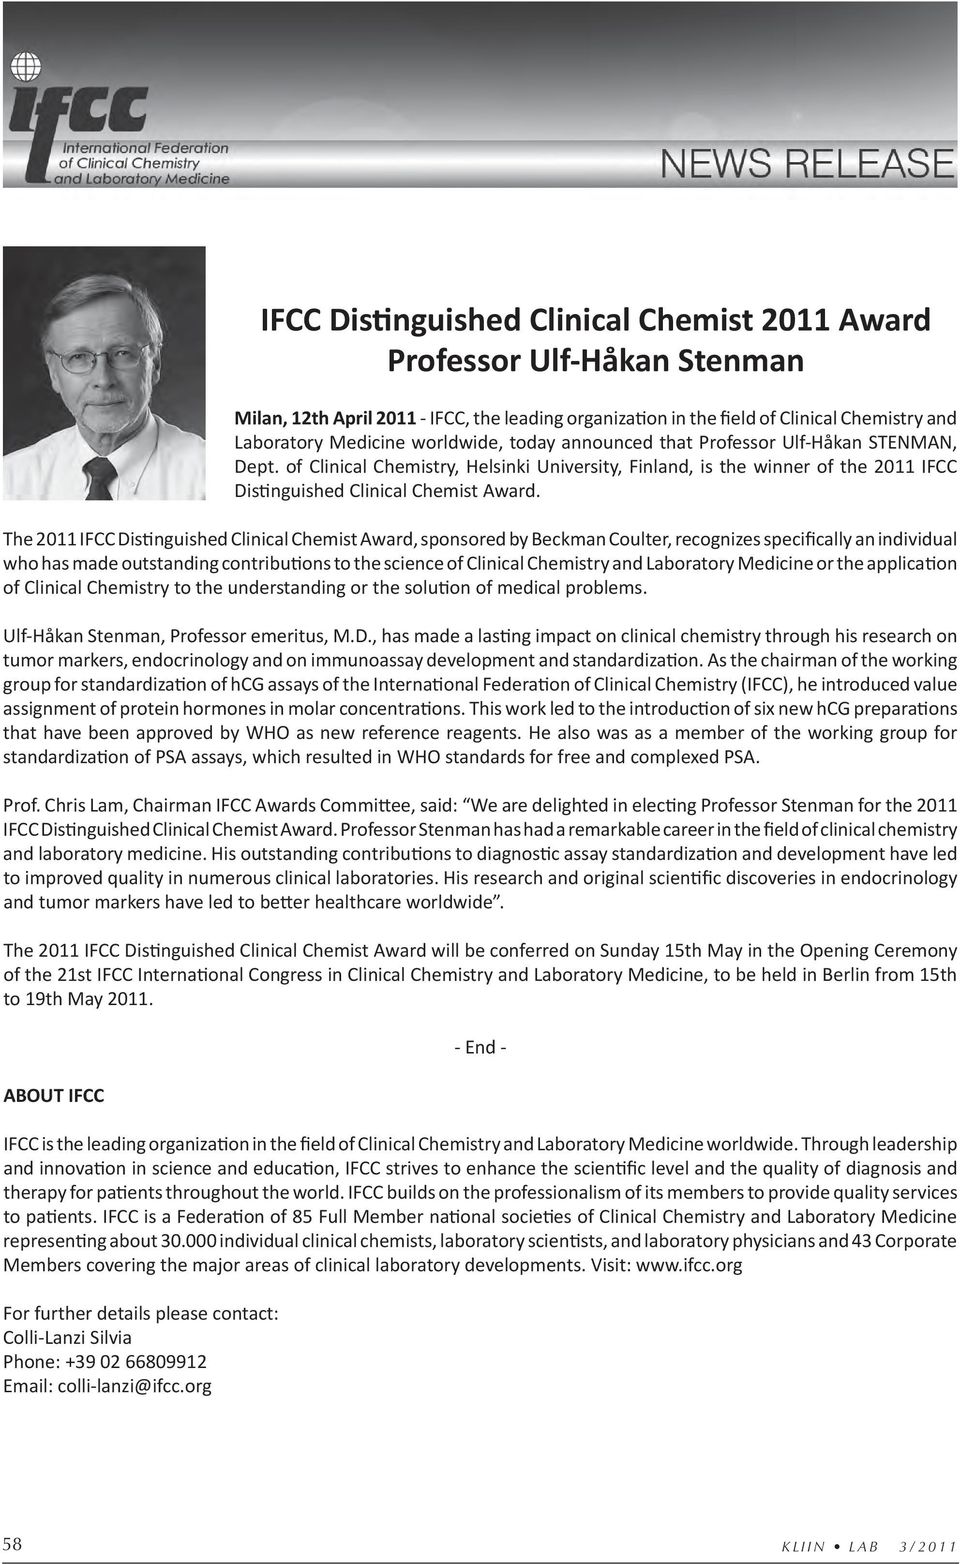 The 2011 IFCC Distinguished Clinical Chemist Award, sponsored by Beckman Coulter, recognizes specifically an individual who has made outstanding contributions to the science of Clinical Chemistry and